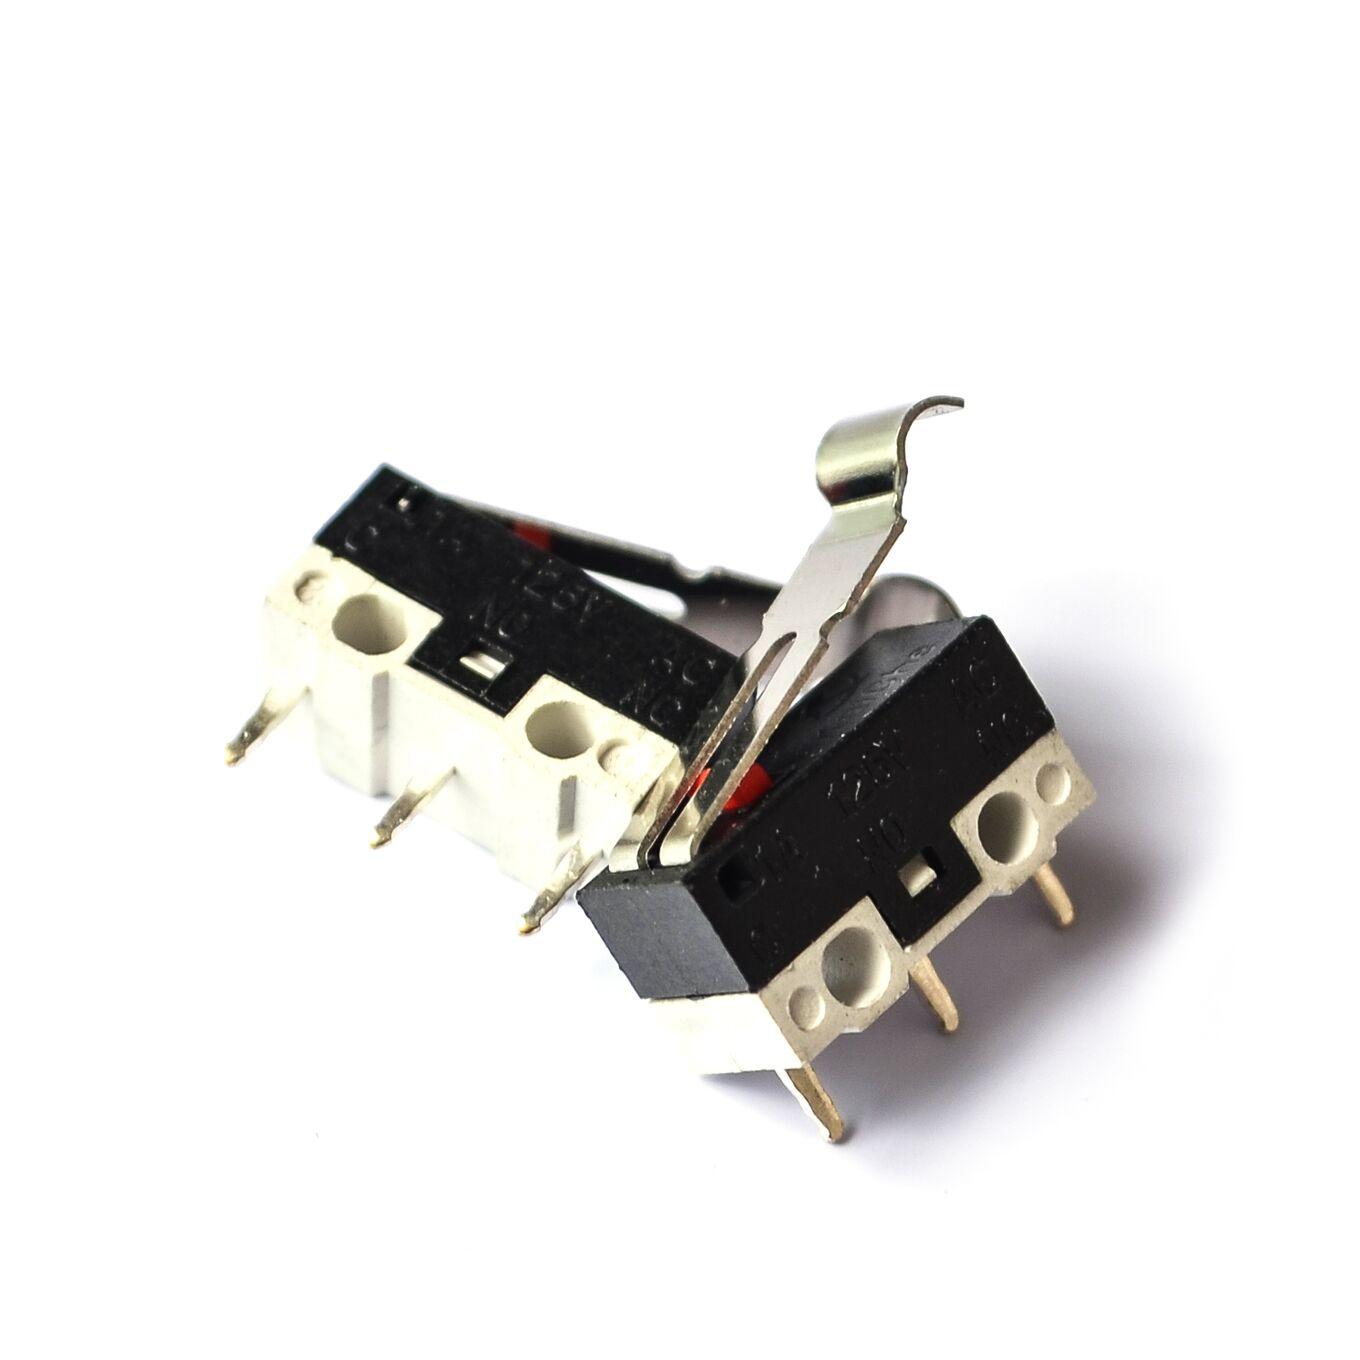 10pcs Limit Microswitch With Three Straight Legs Mouse Side Key Momentary Micro Limit Switch 1A/125VAC For MK7/ MK8